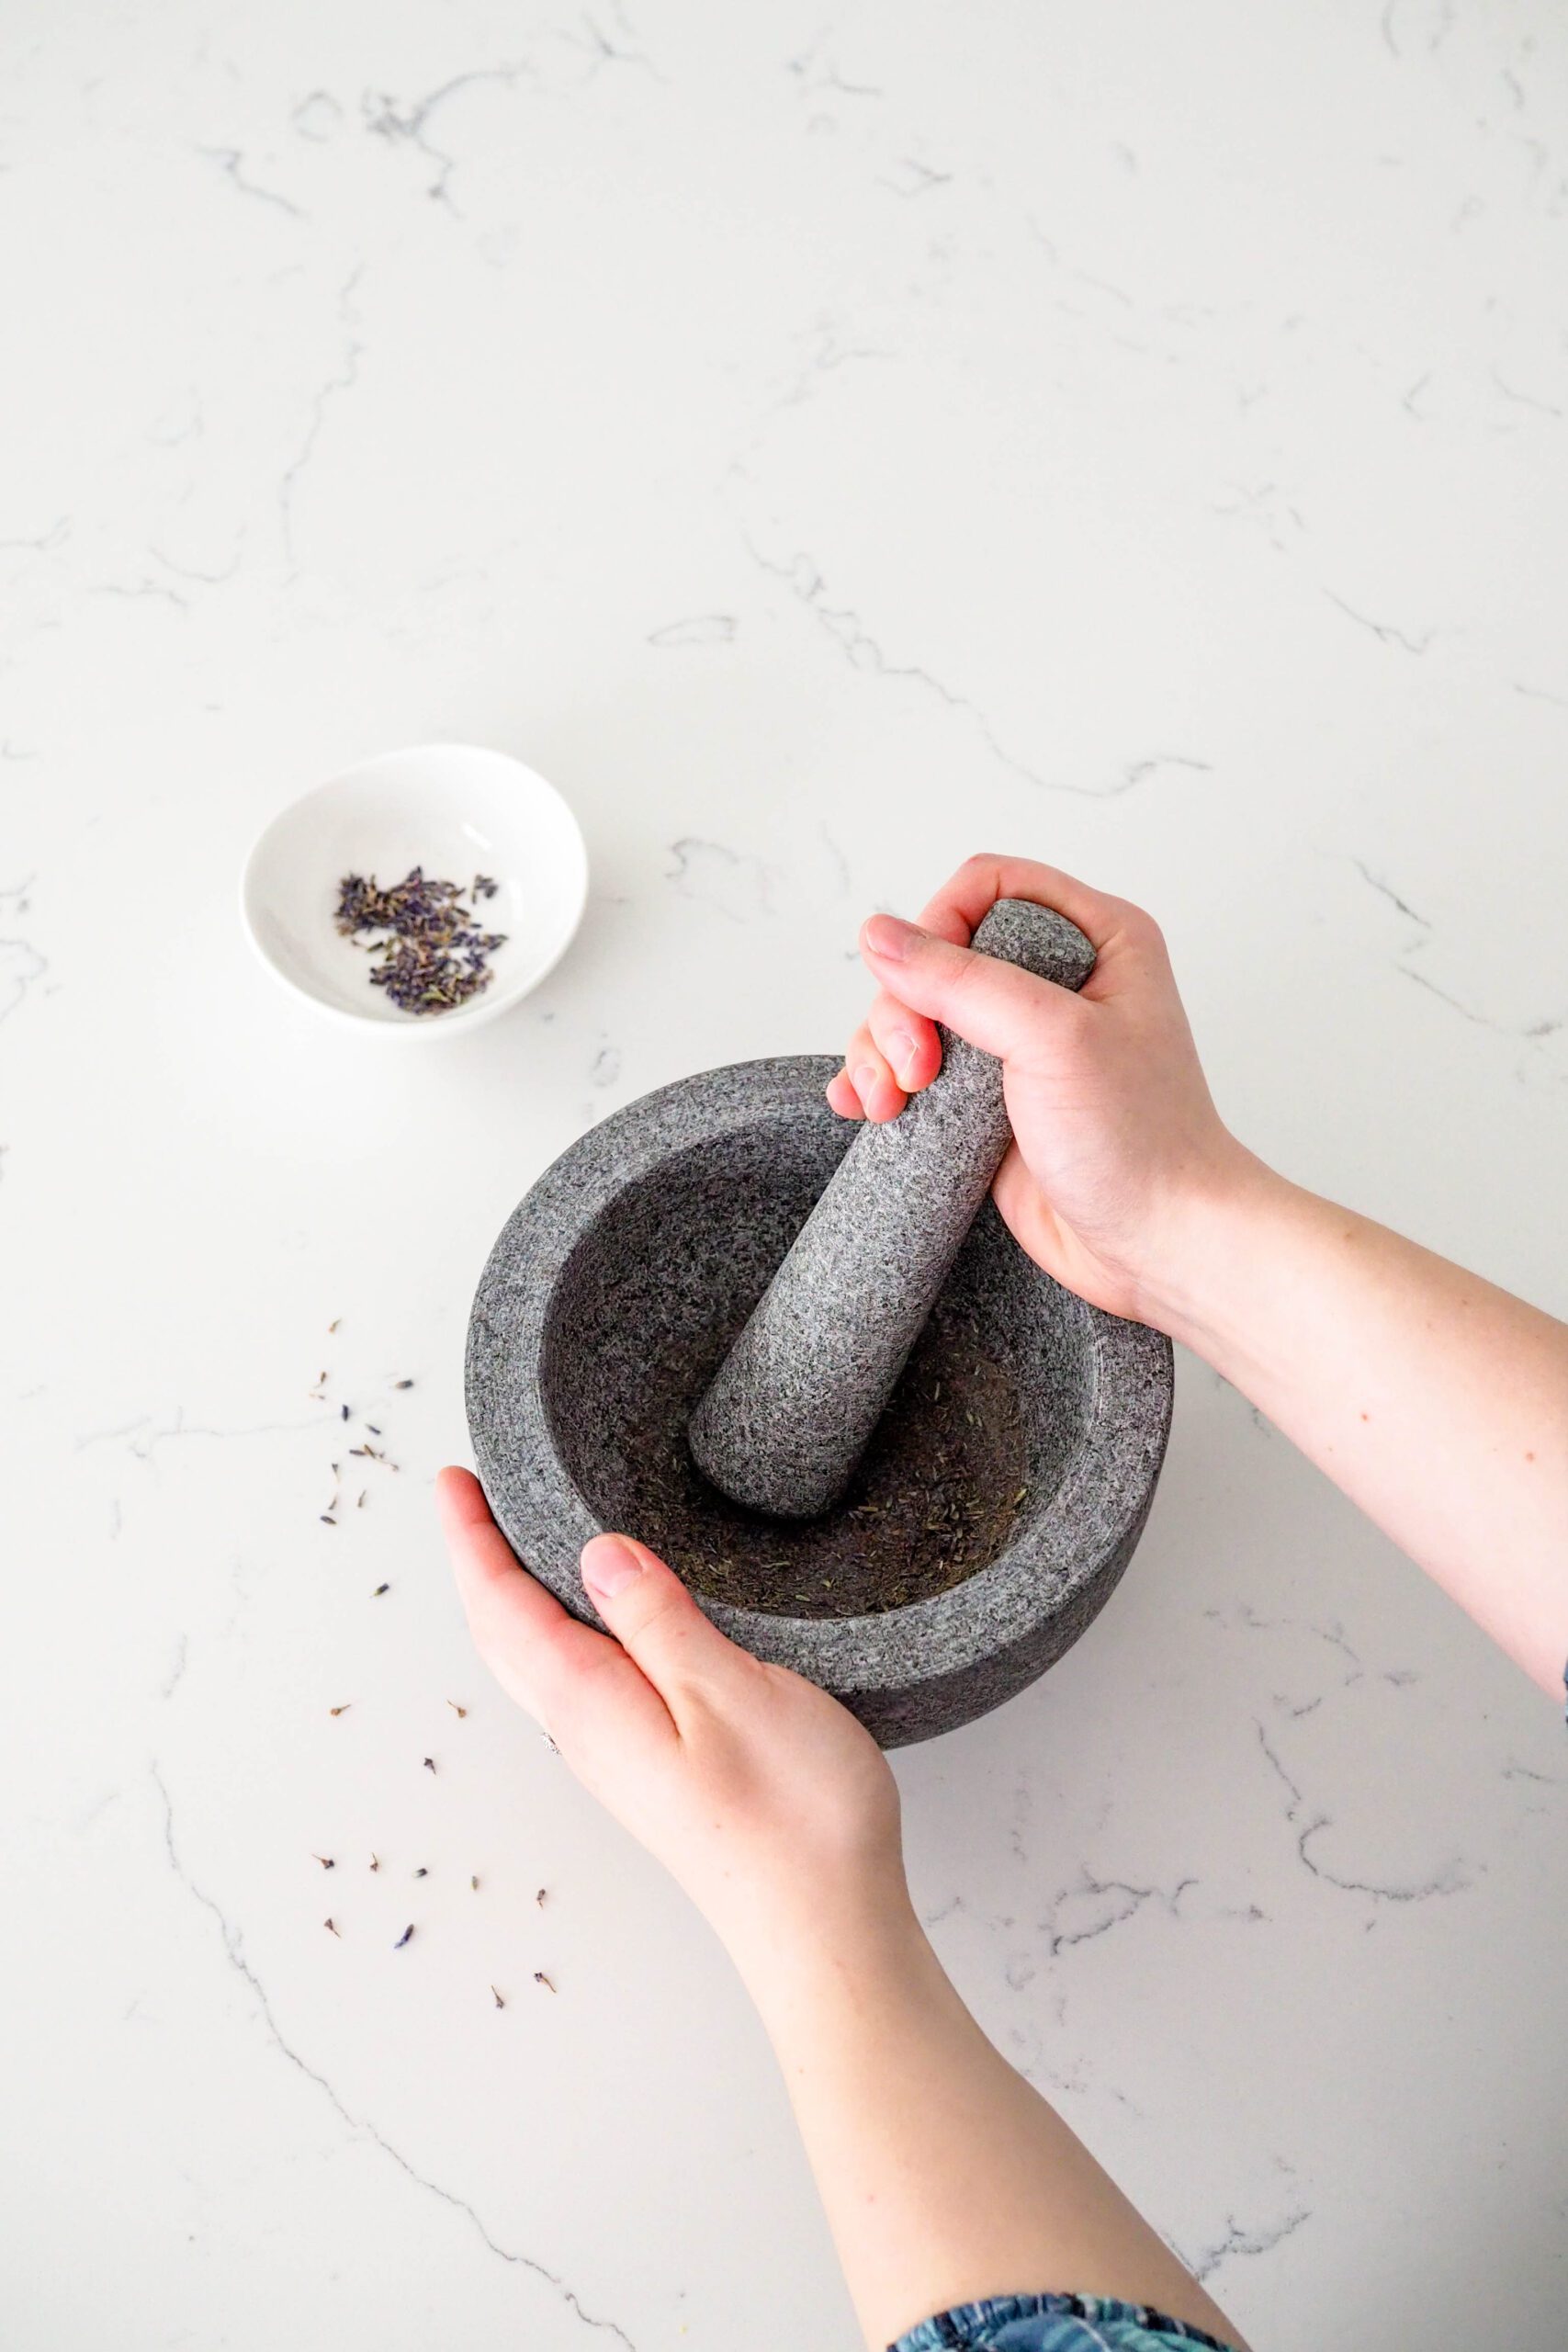 A hand grinds lavender buds in a mortar and pestle.